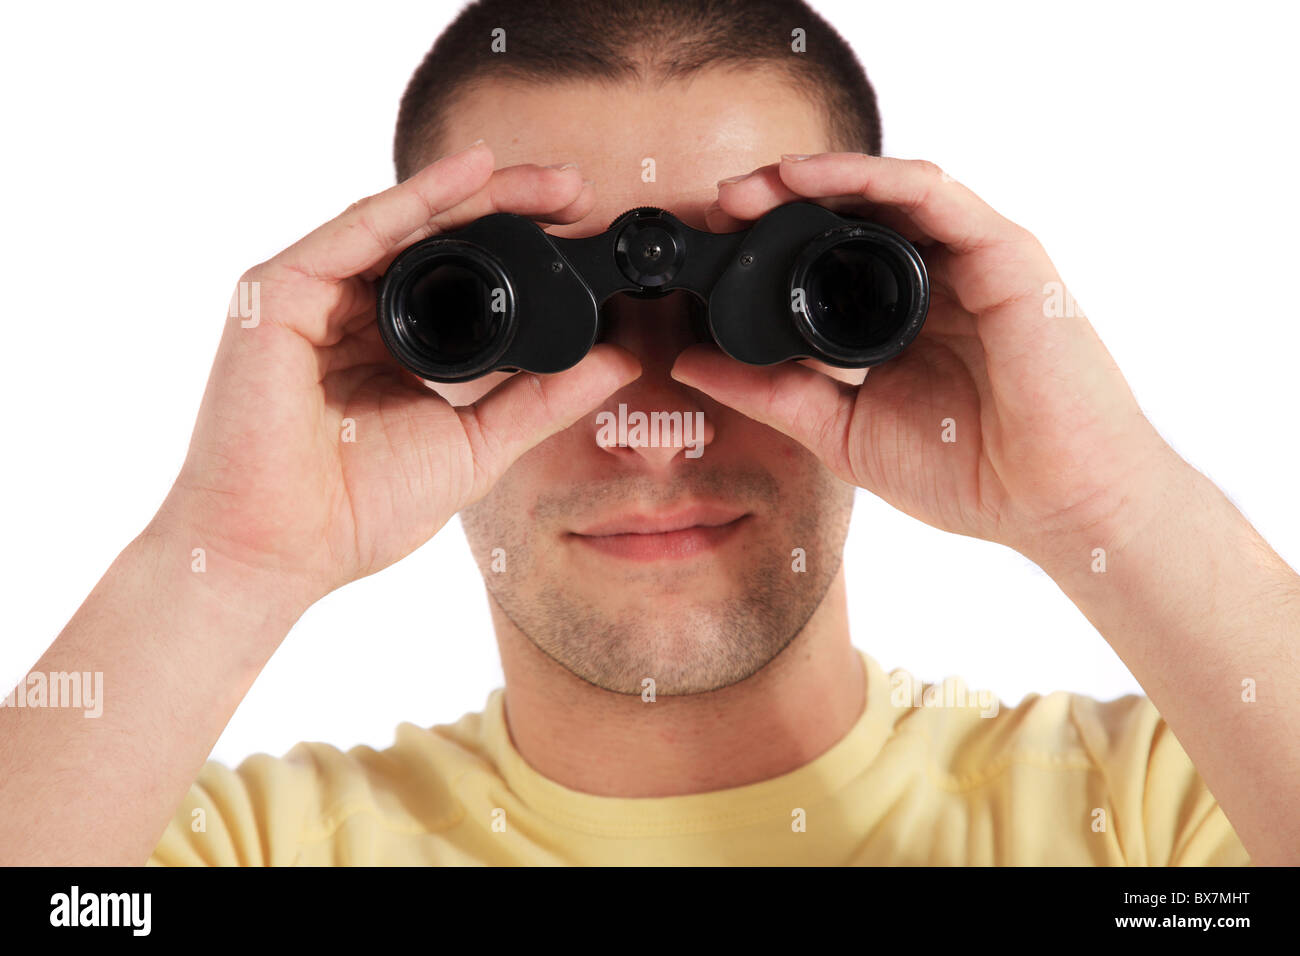 Attractive young man using spyglass. All on white background Stock Photo